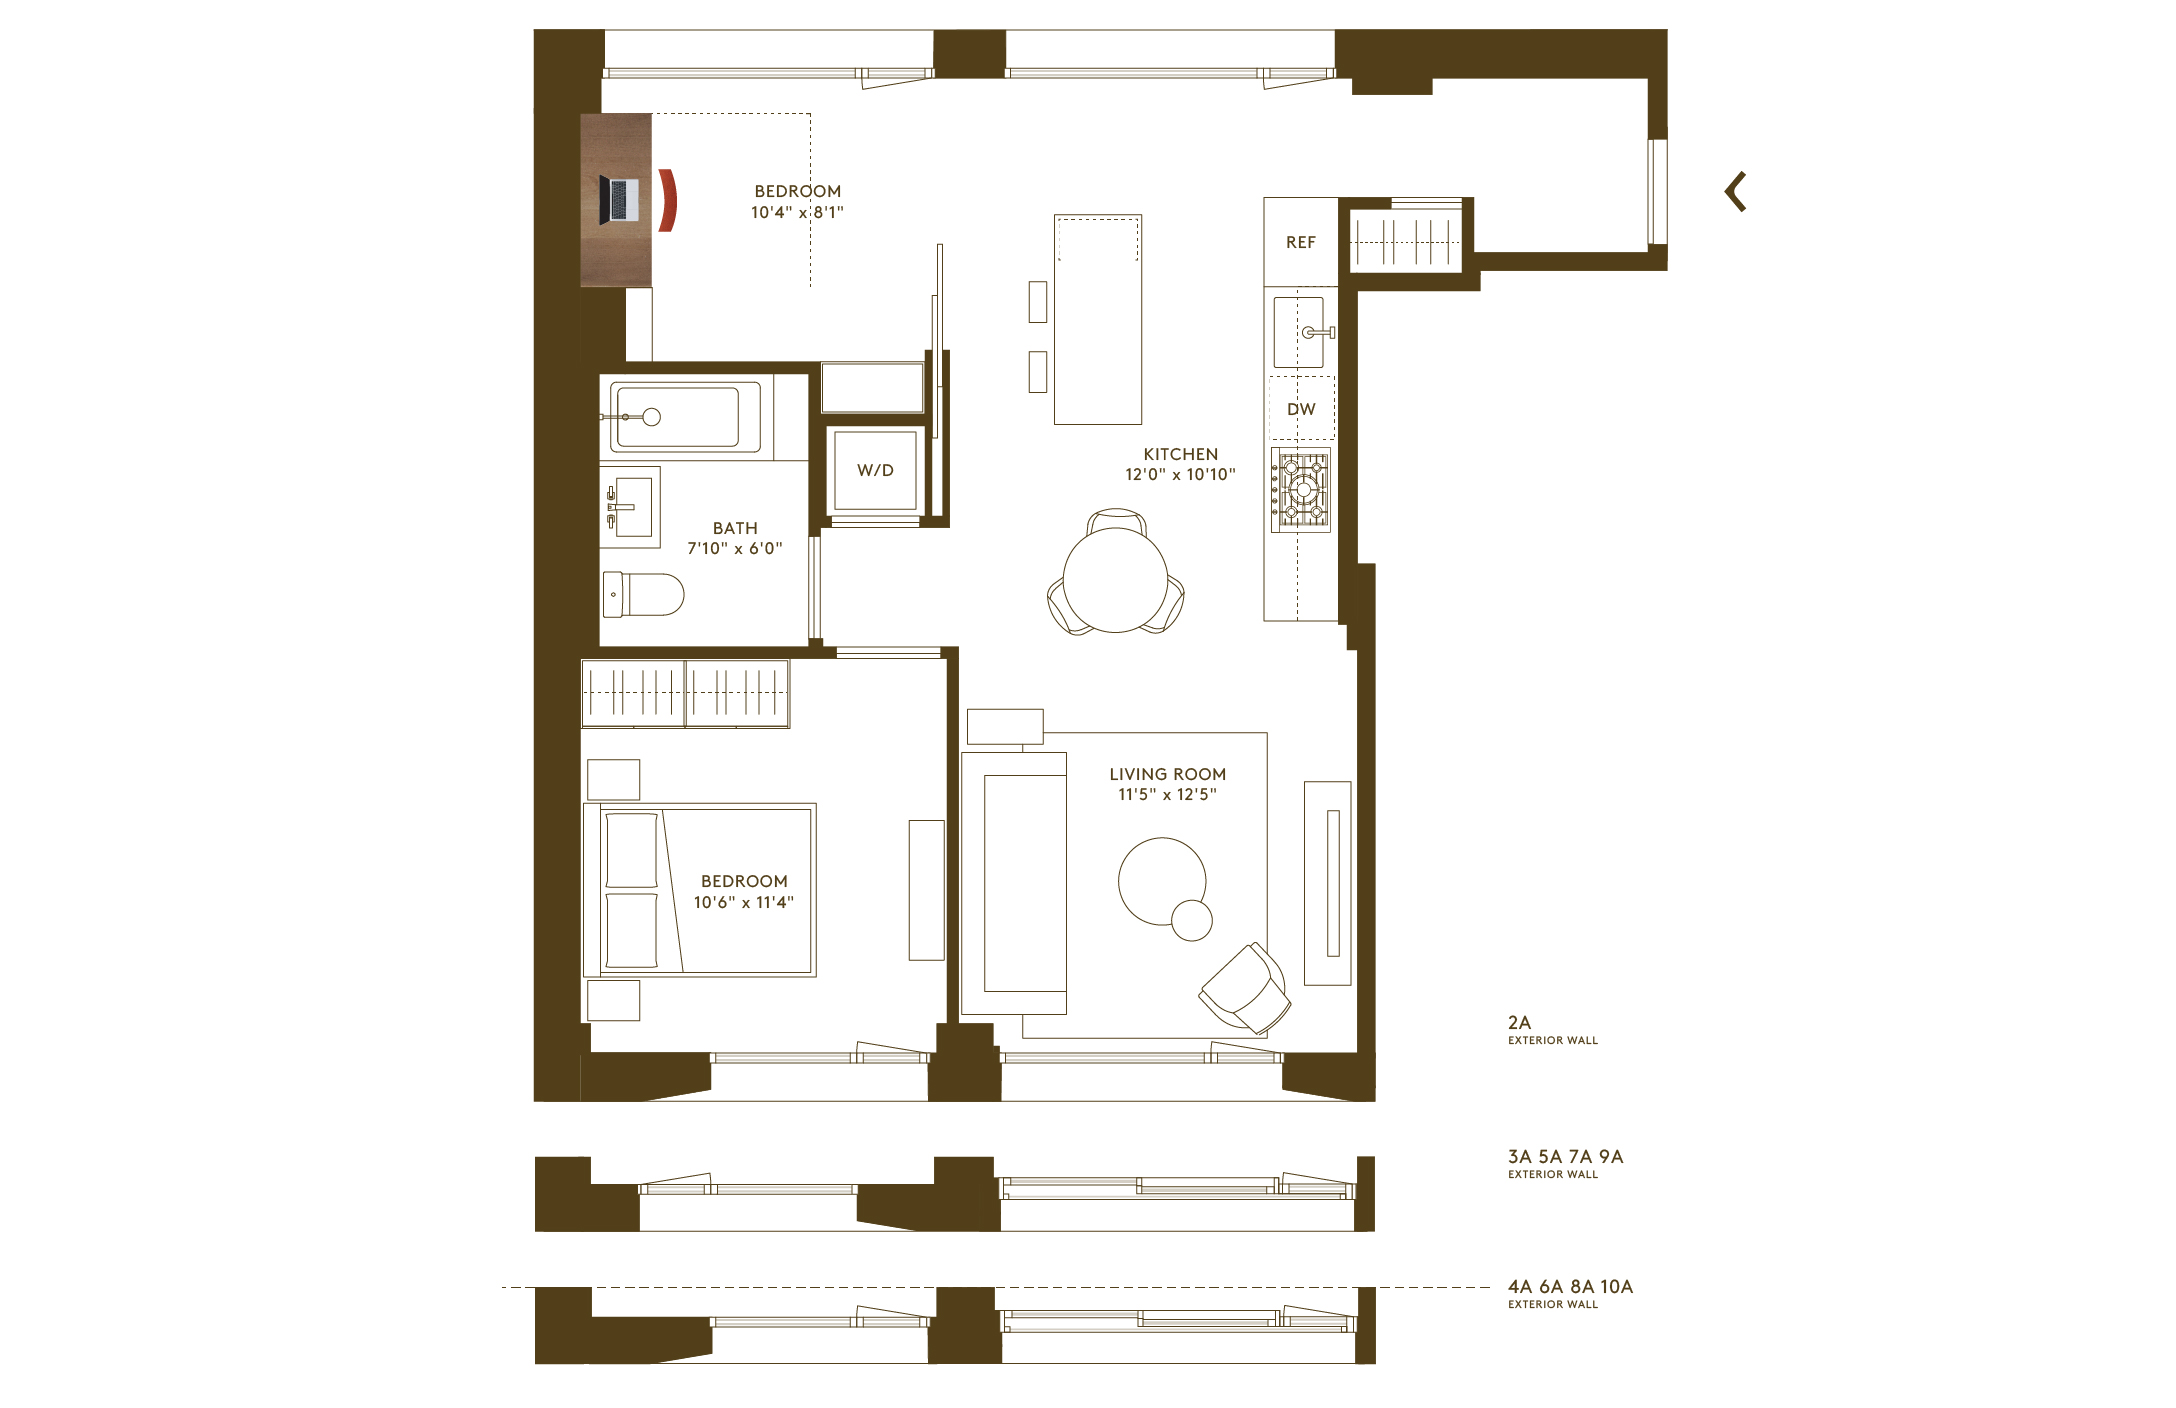 Floorplan of convertible 2-bedroom condo with home office space at Hendrix House NYC condos in Gramercy.